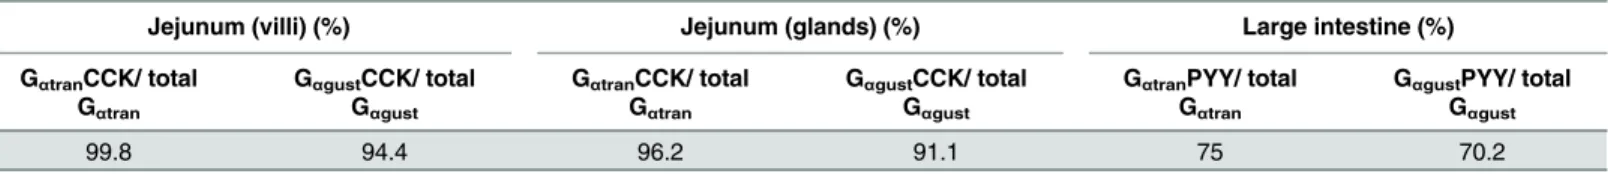 Table 3. Percentages of co-localization of G α tran - or G α gust -IR cells with CCK- and PYY-IR in the jejunum and large intestine mucosa.